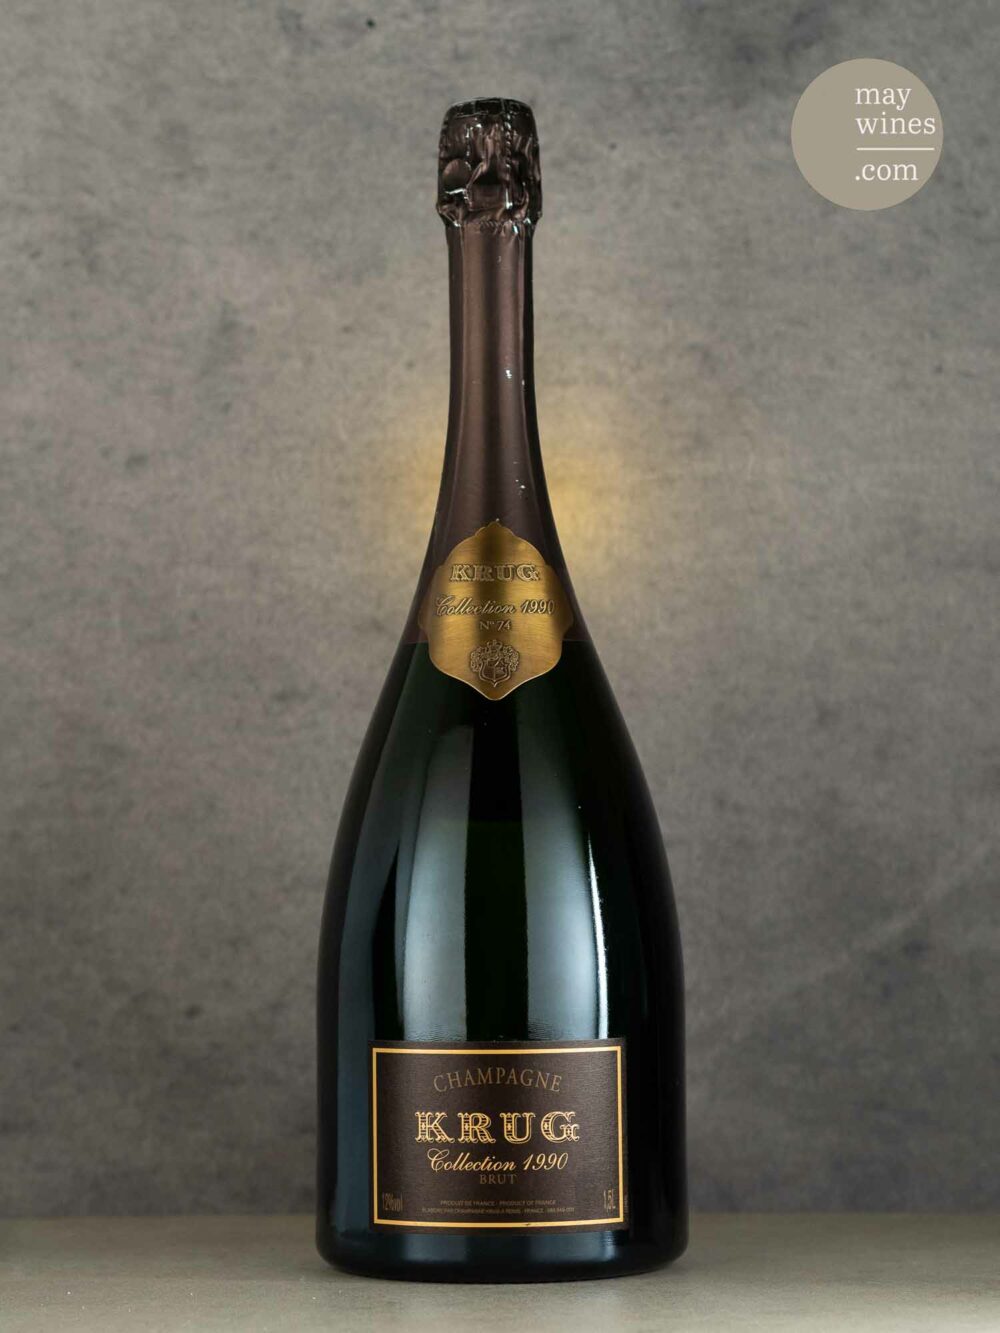 May Wines – Champagner – 1990 Collection Brut  - Krug